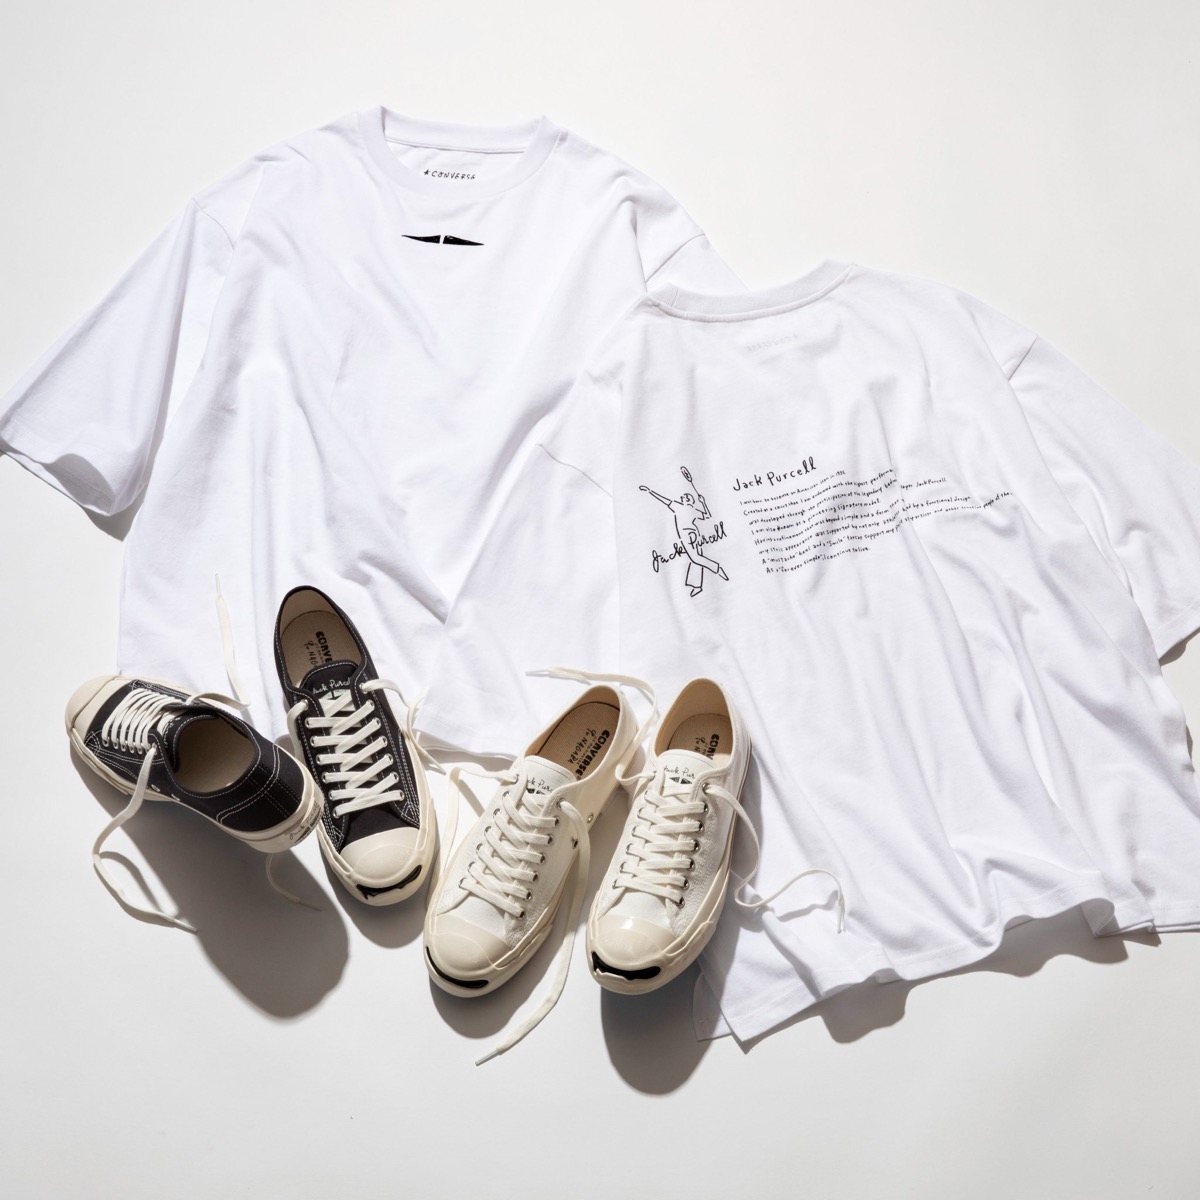 CONVERSE × 長場雄『JACK PURCELL US YU NAGABA』が国内5月20日に発売予定 | UP TO DATE